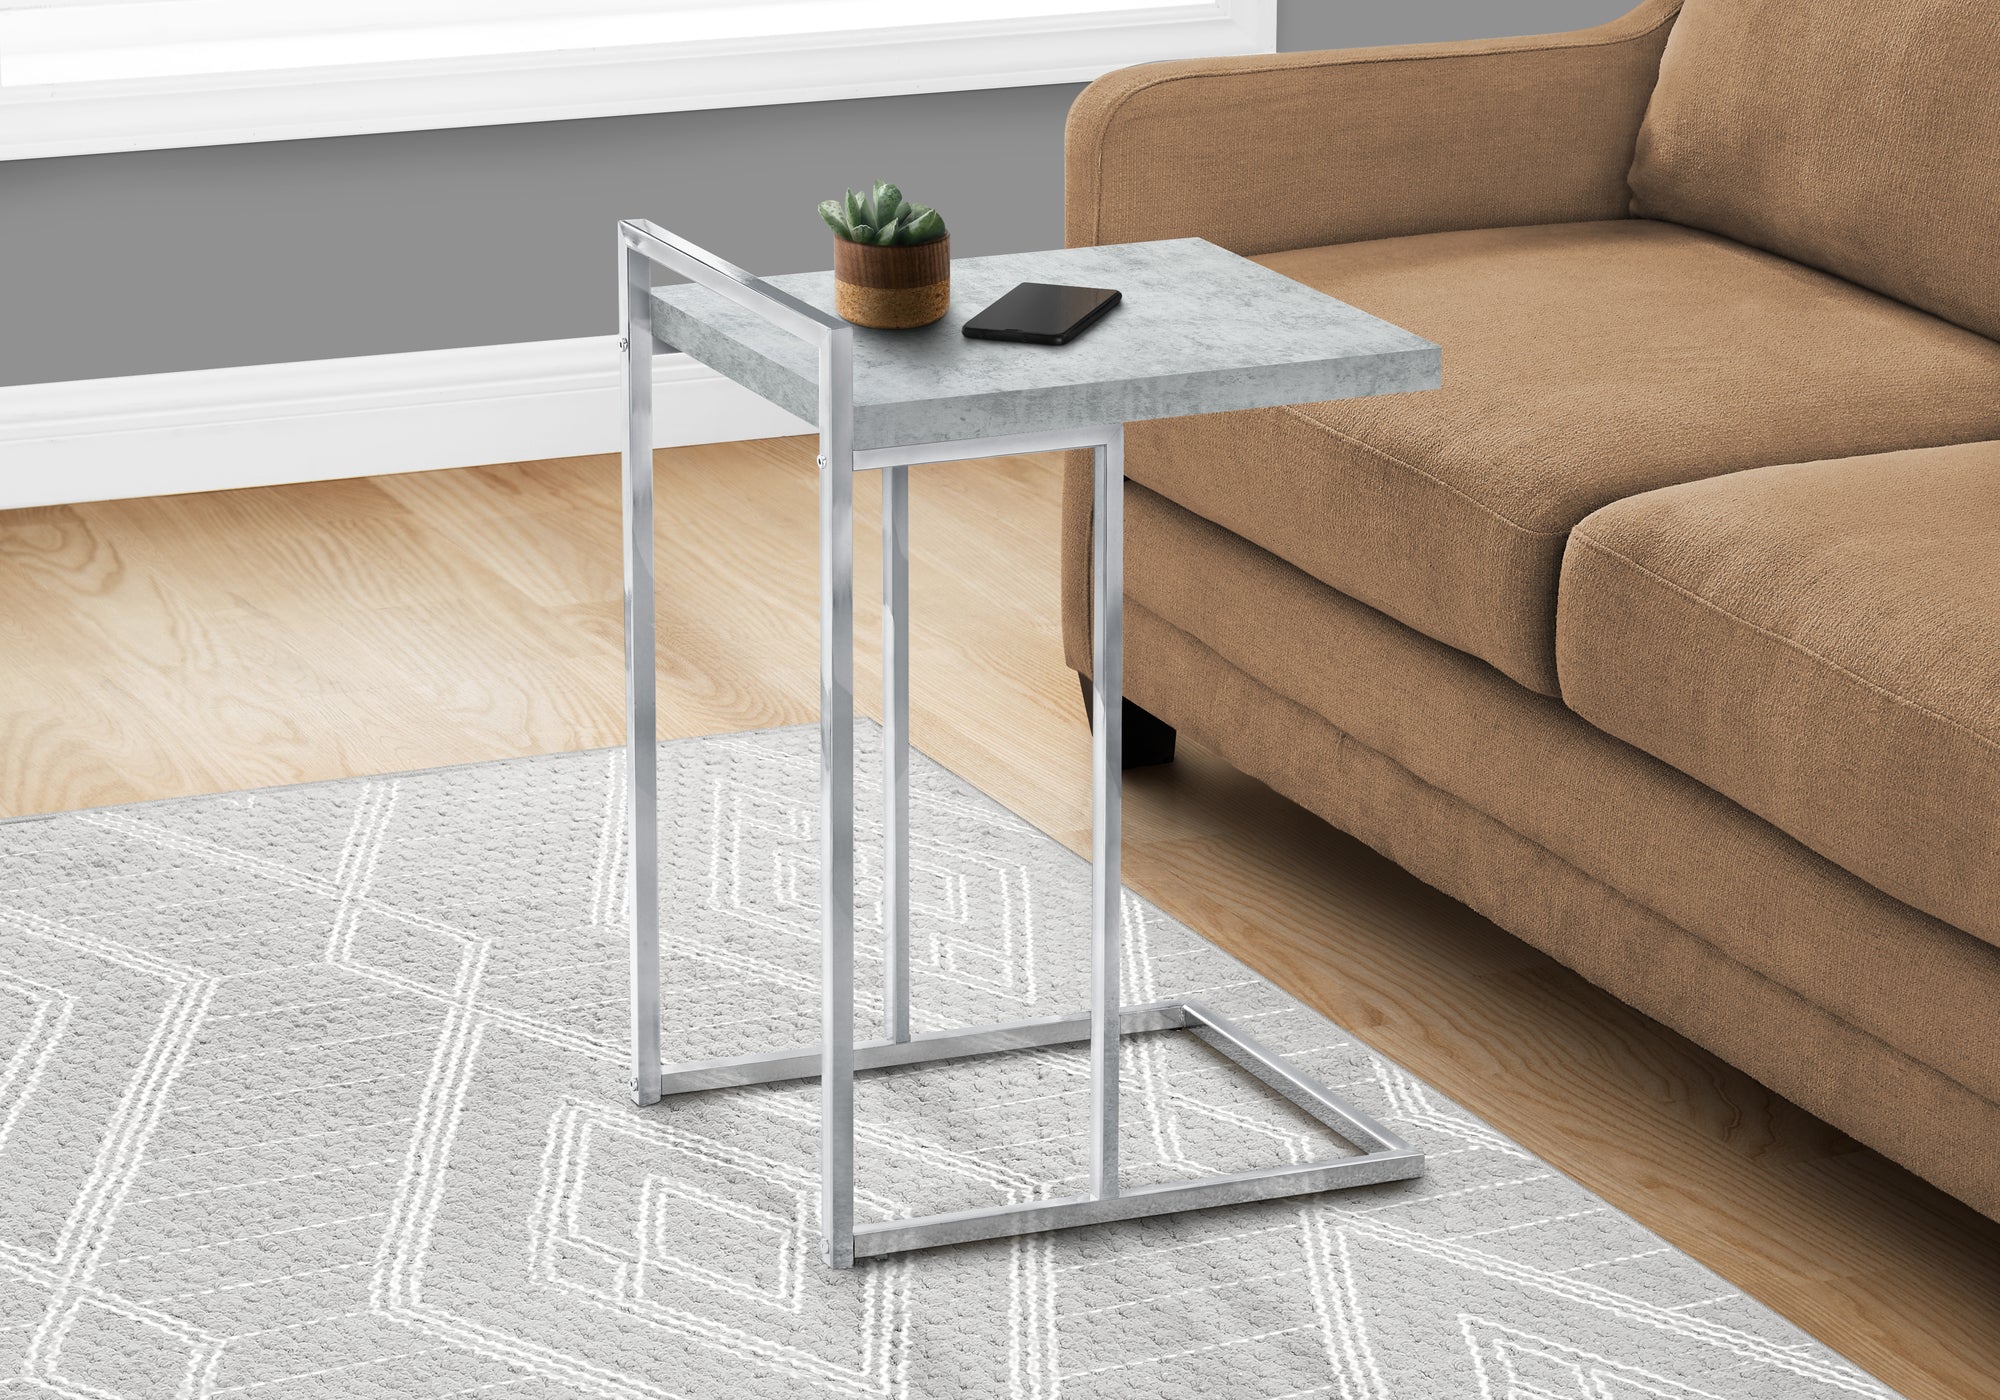 MN-883639    Accent Table, C-Shaped, End, Side, Snack, Living Room, Bedroom, Metal Frame, Laminate, Grey Cement Look, Chrome, Contemporary, Modern